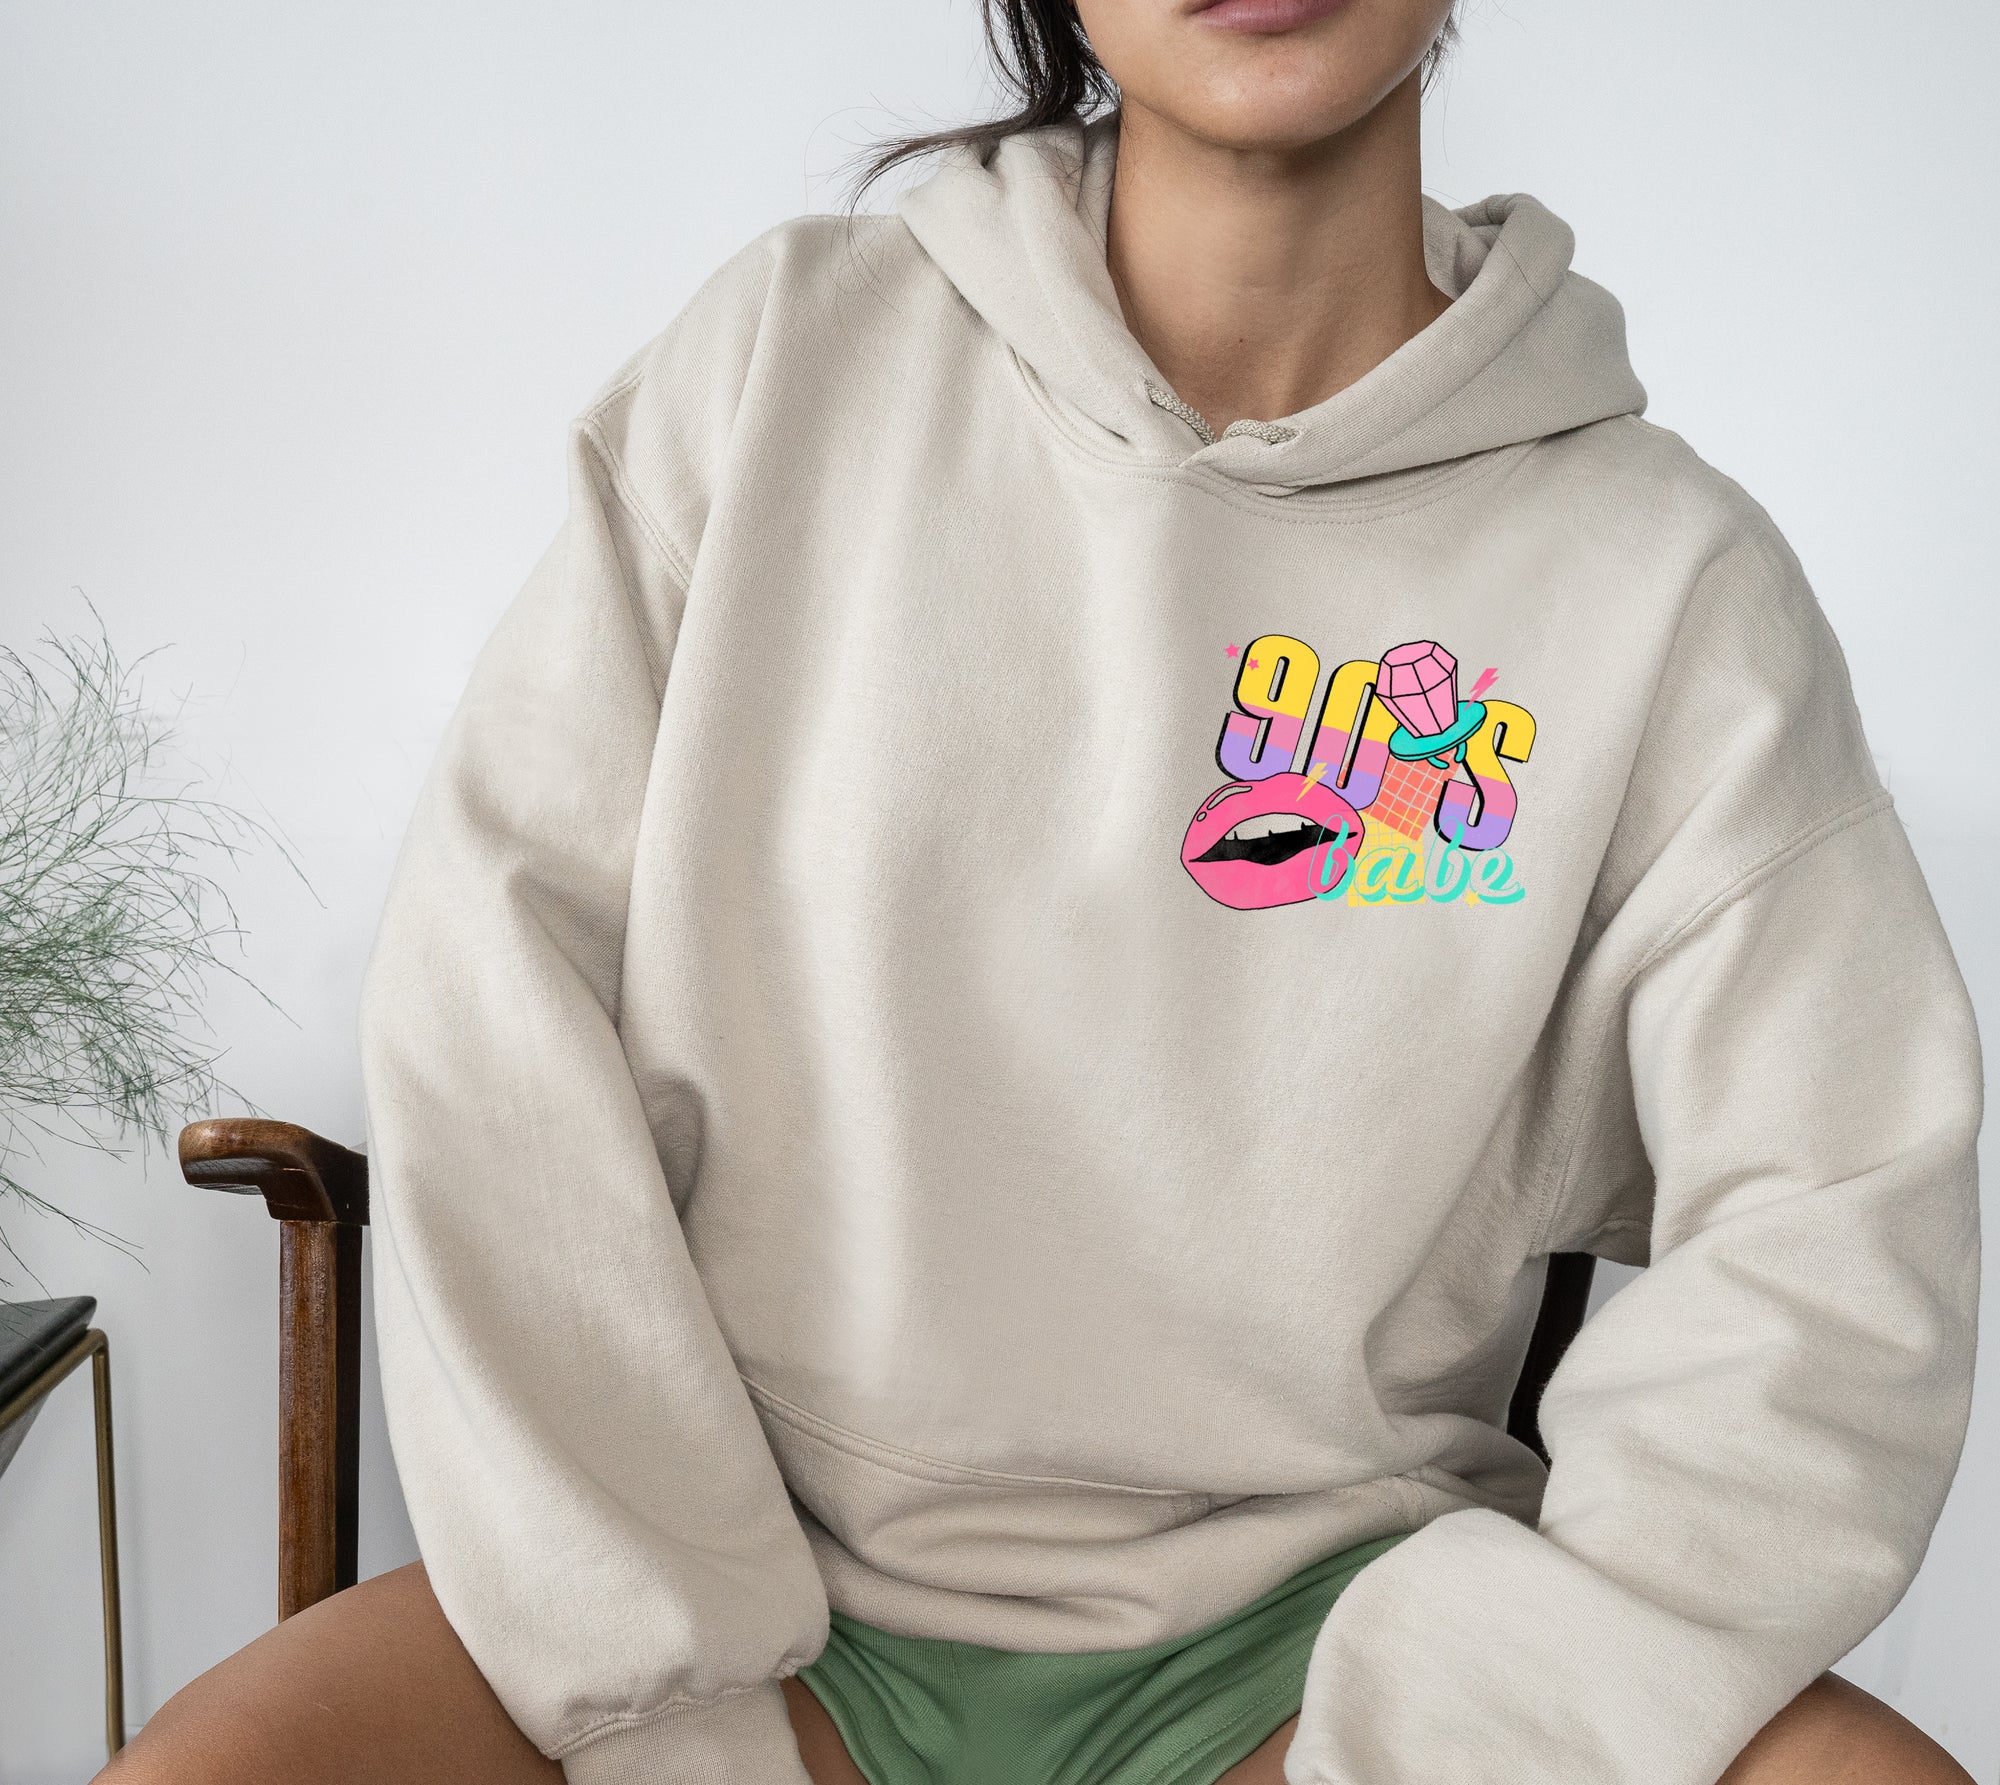 90’s babe Hoodie